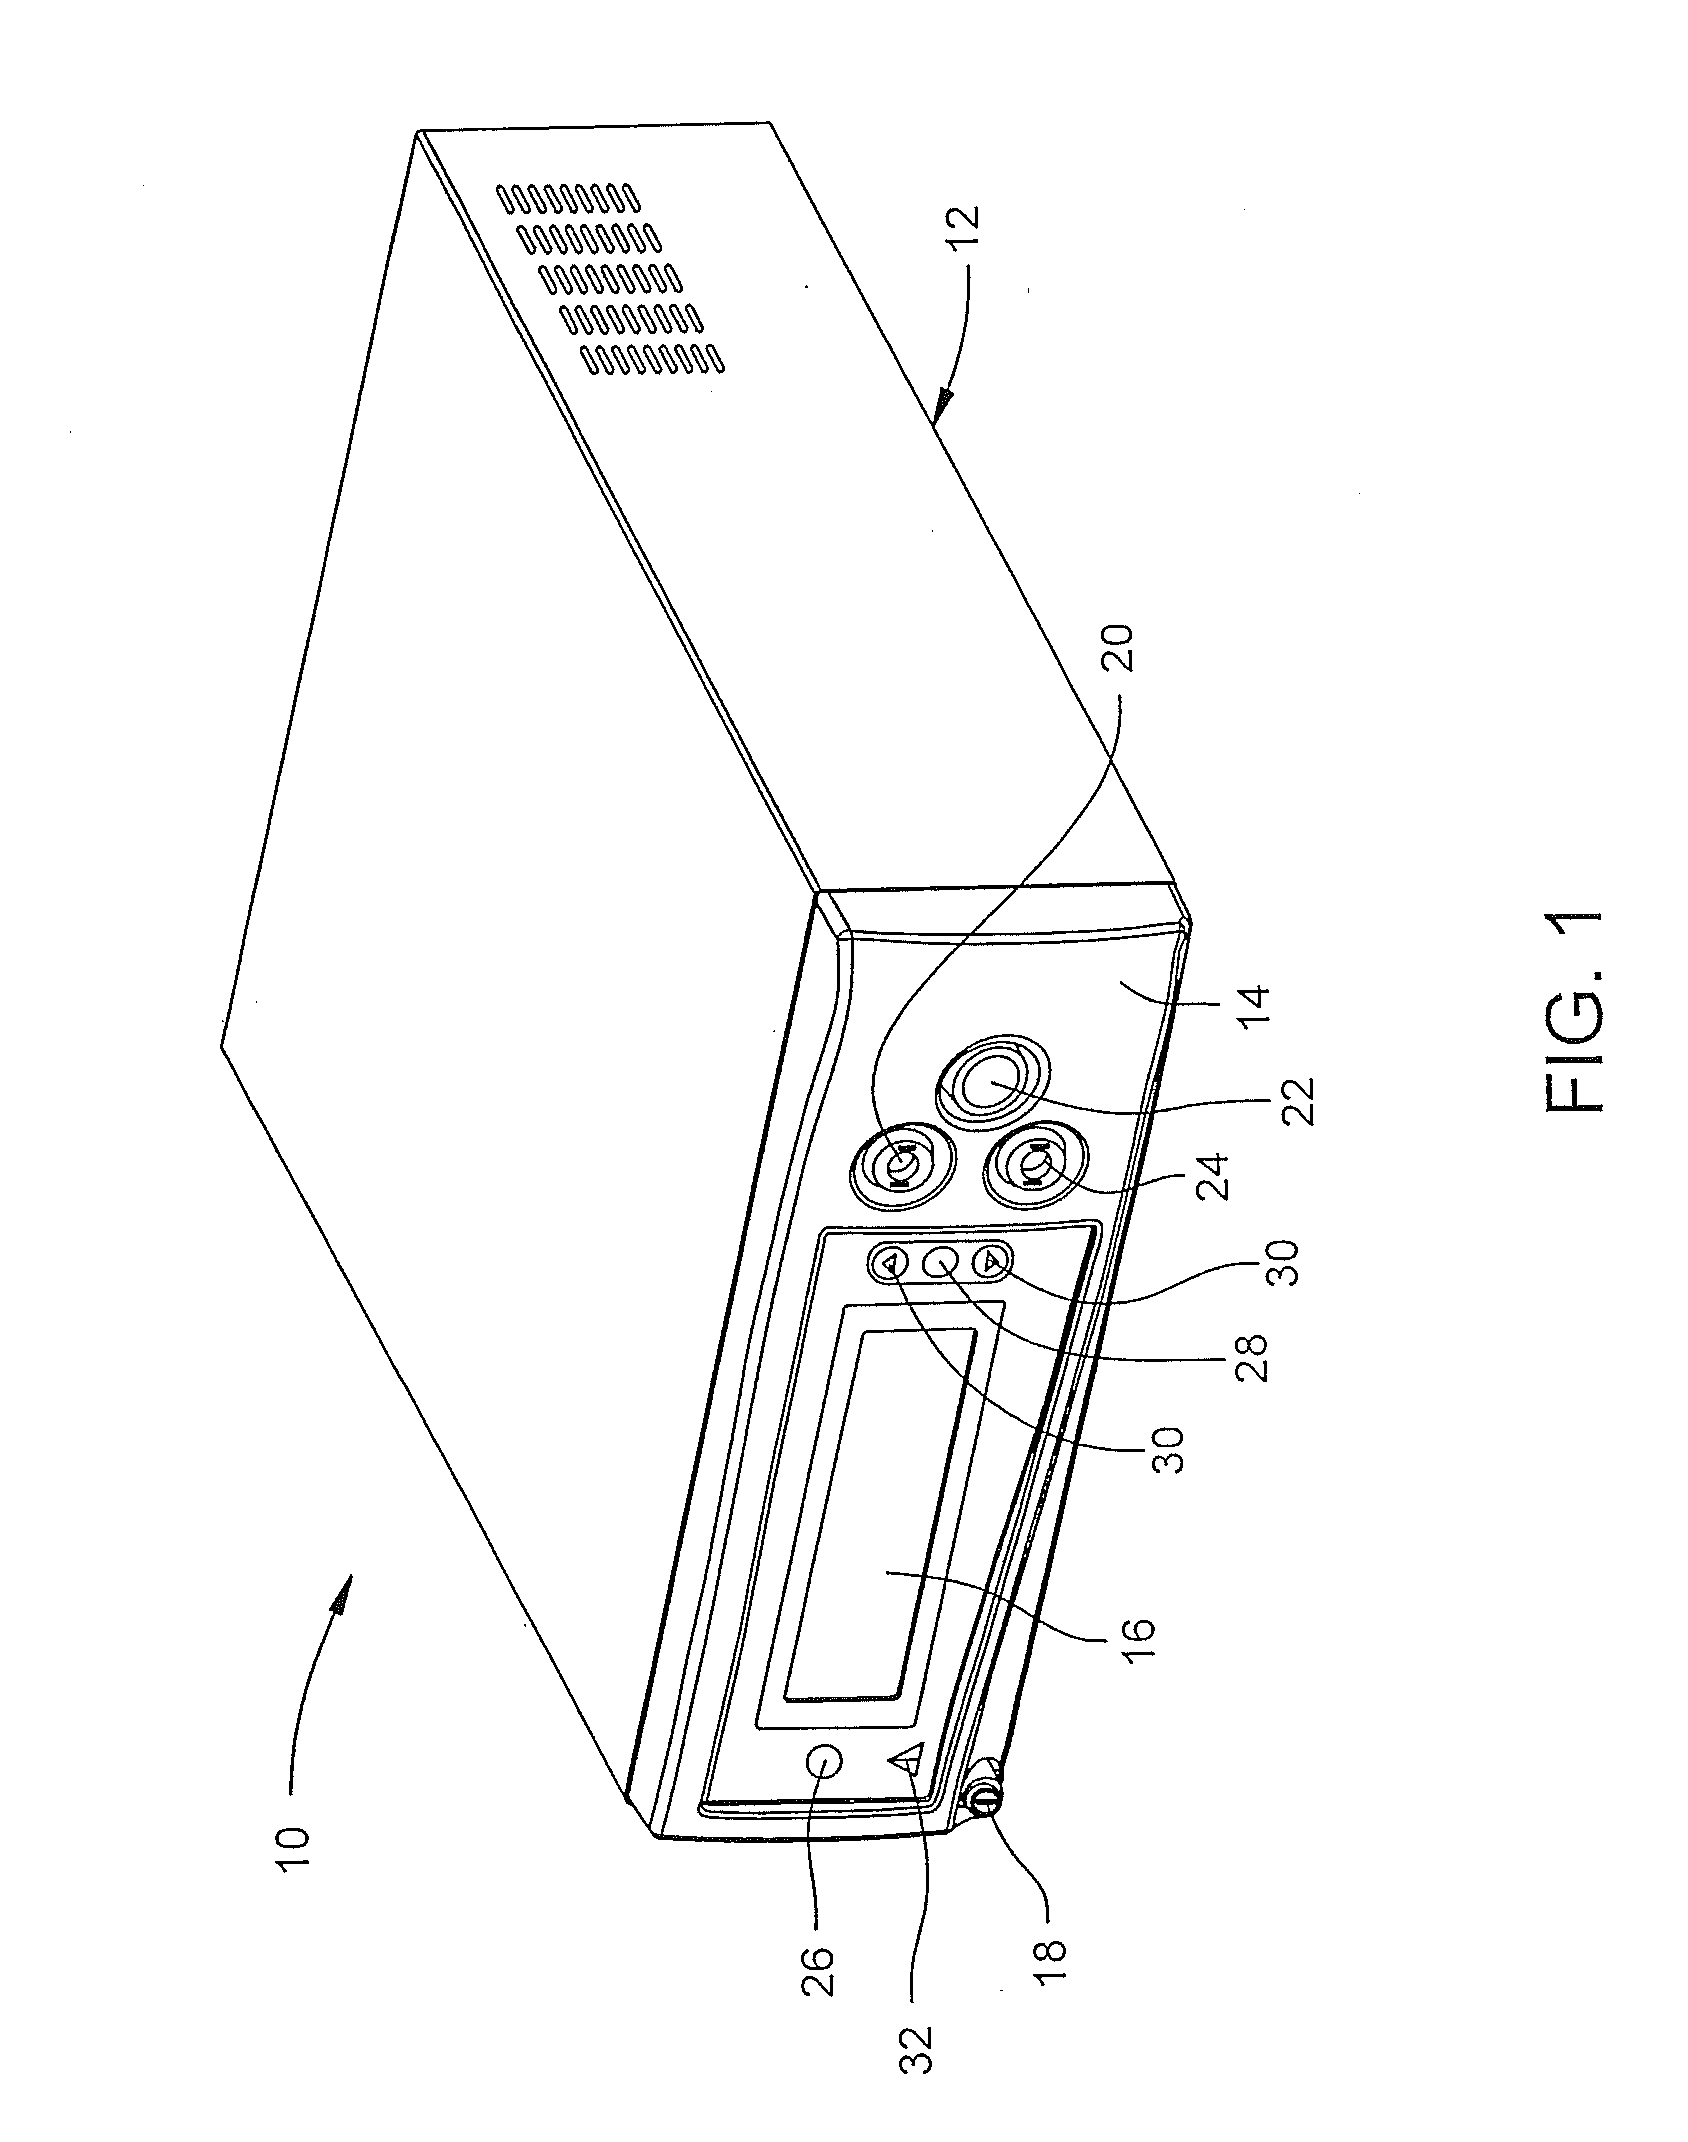 RF energy console including method for vessel sealing